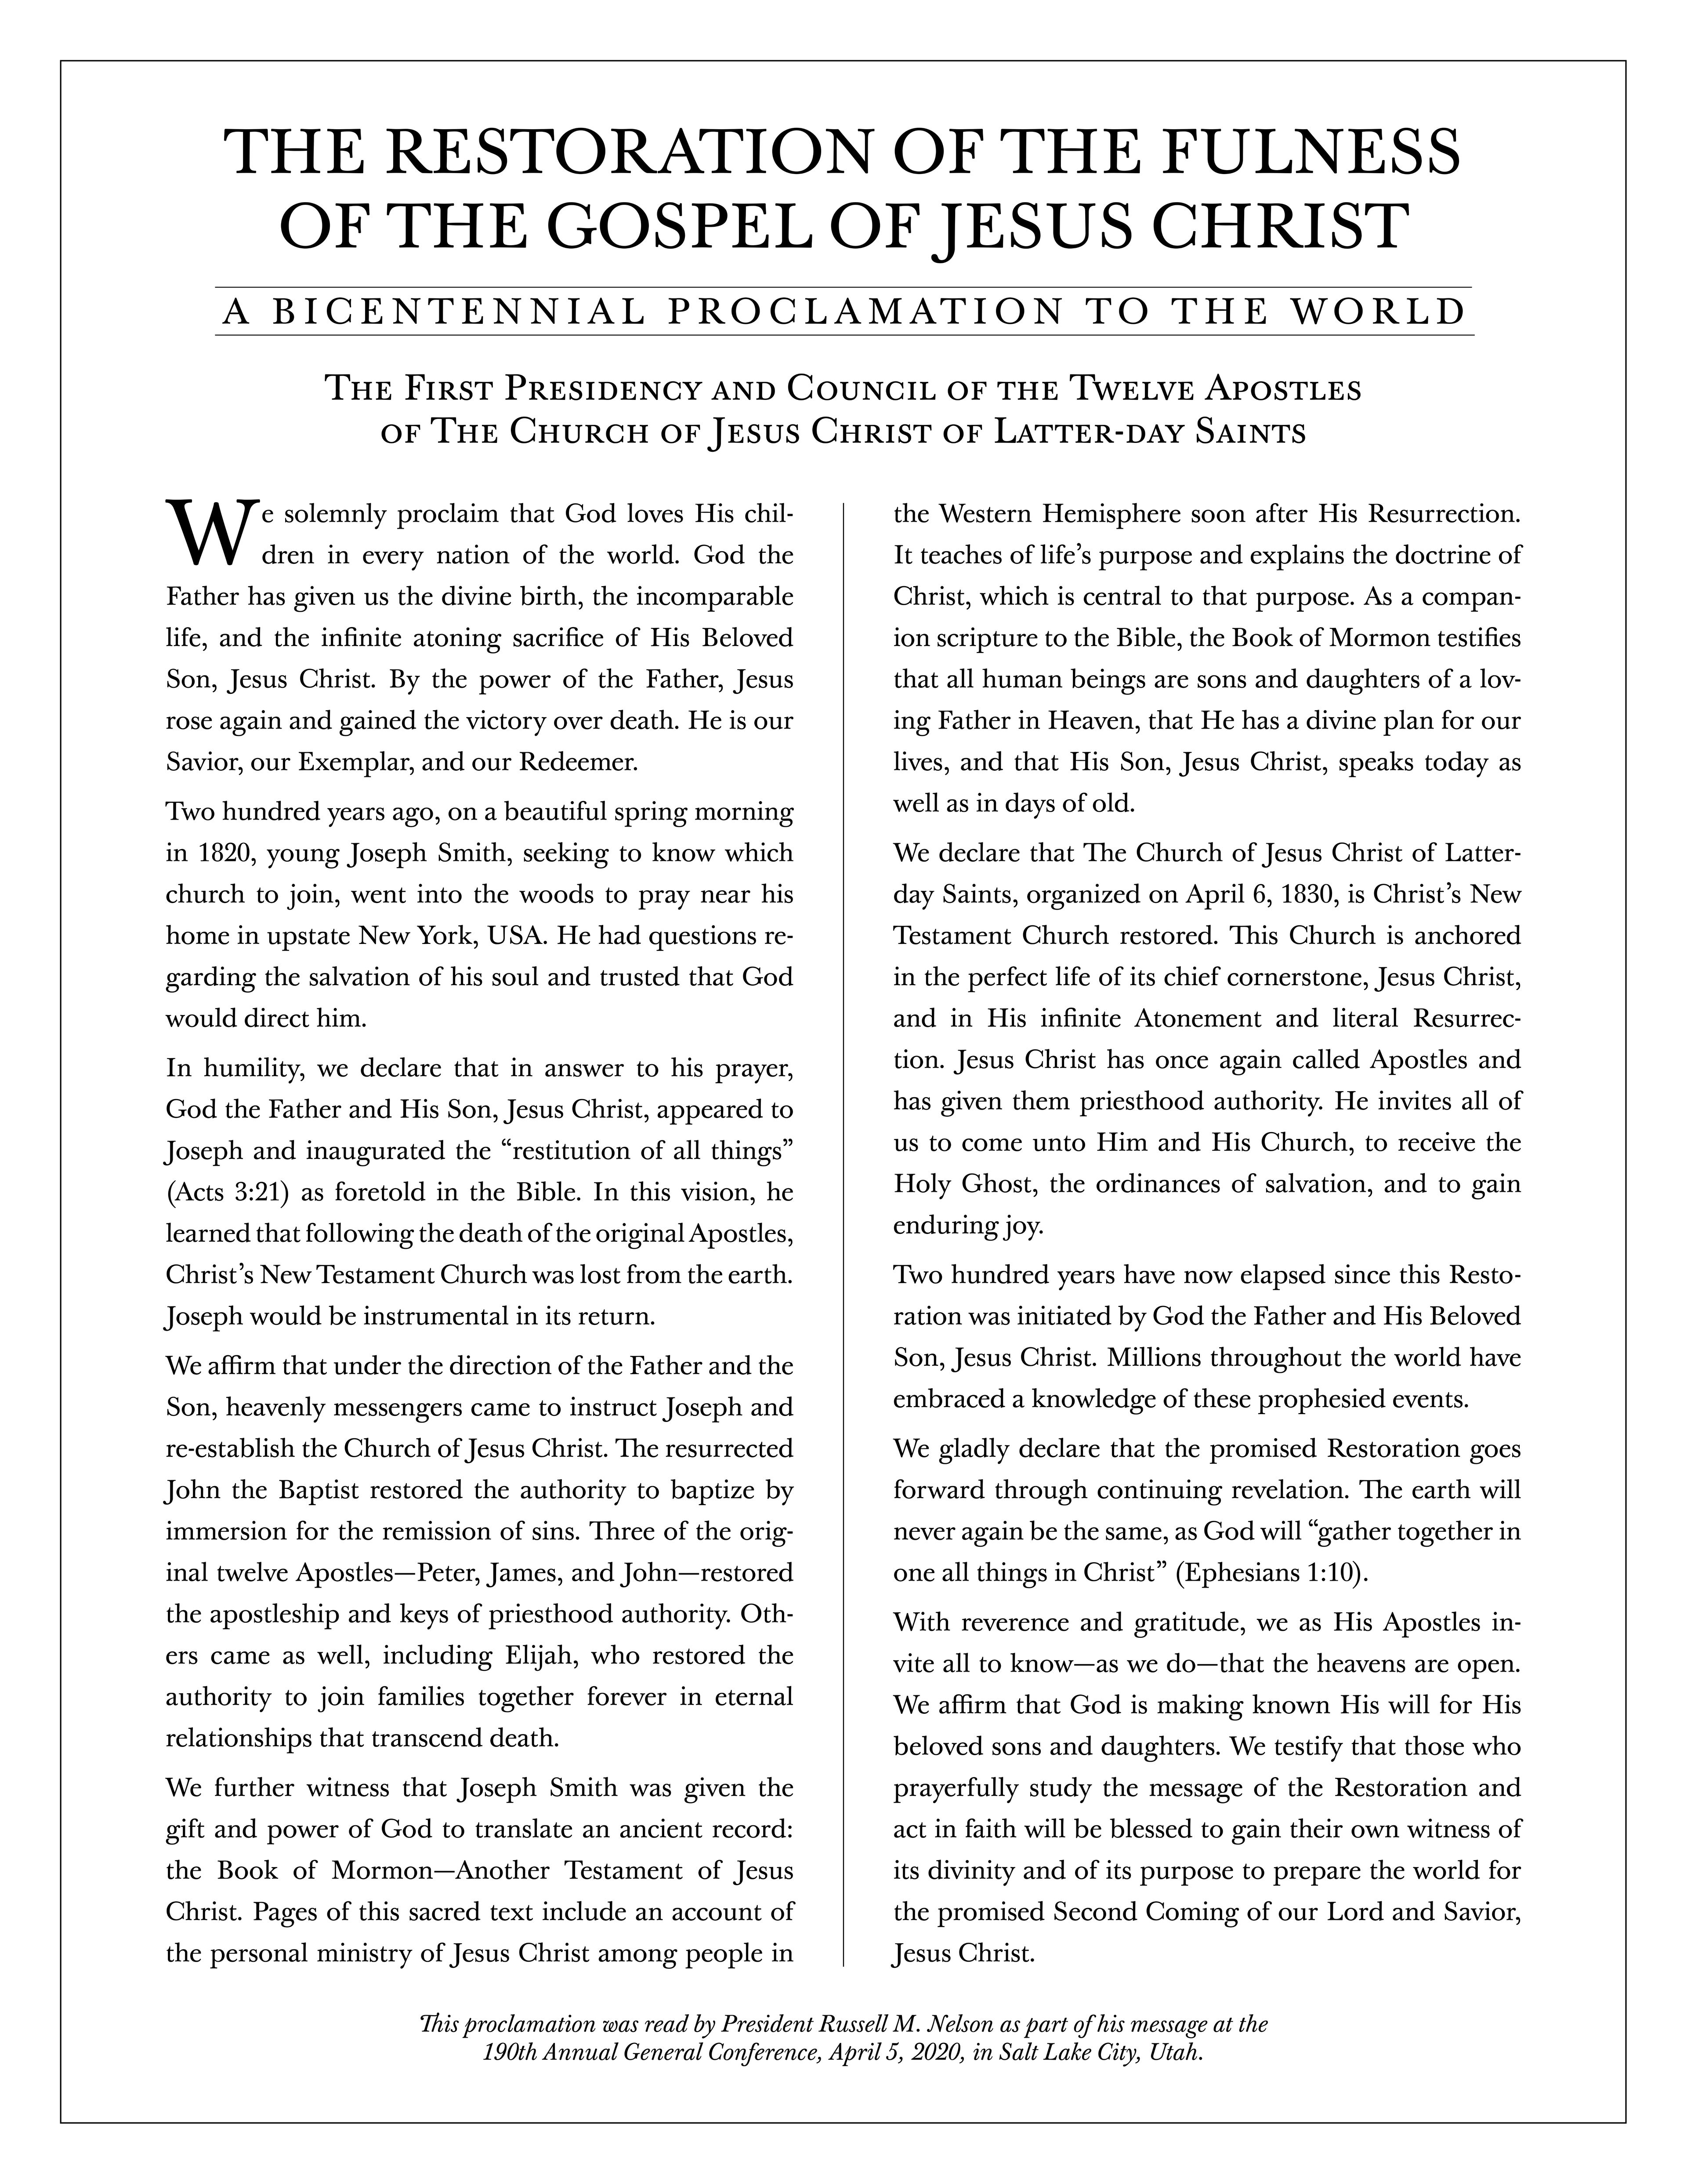 The official poster of “The Restoration of the Fulness of the Gospel of Jesus Christ: A Bicentennial Proclamation to the World.”